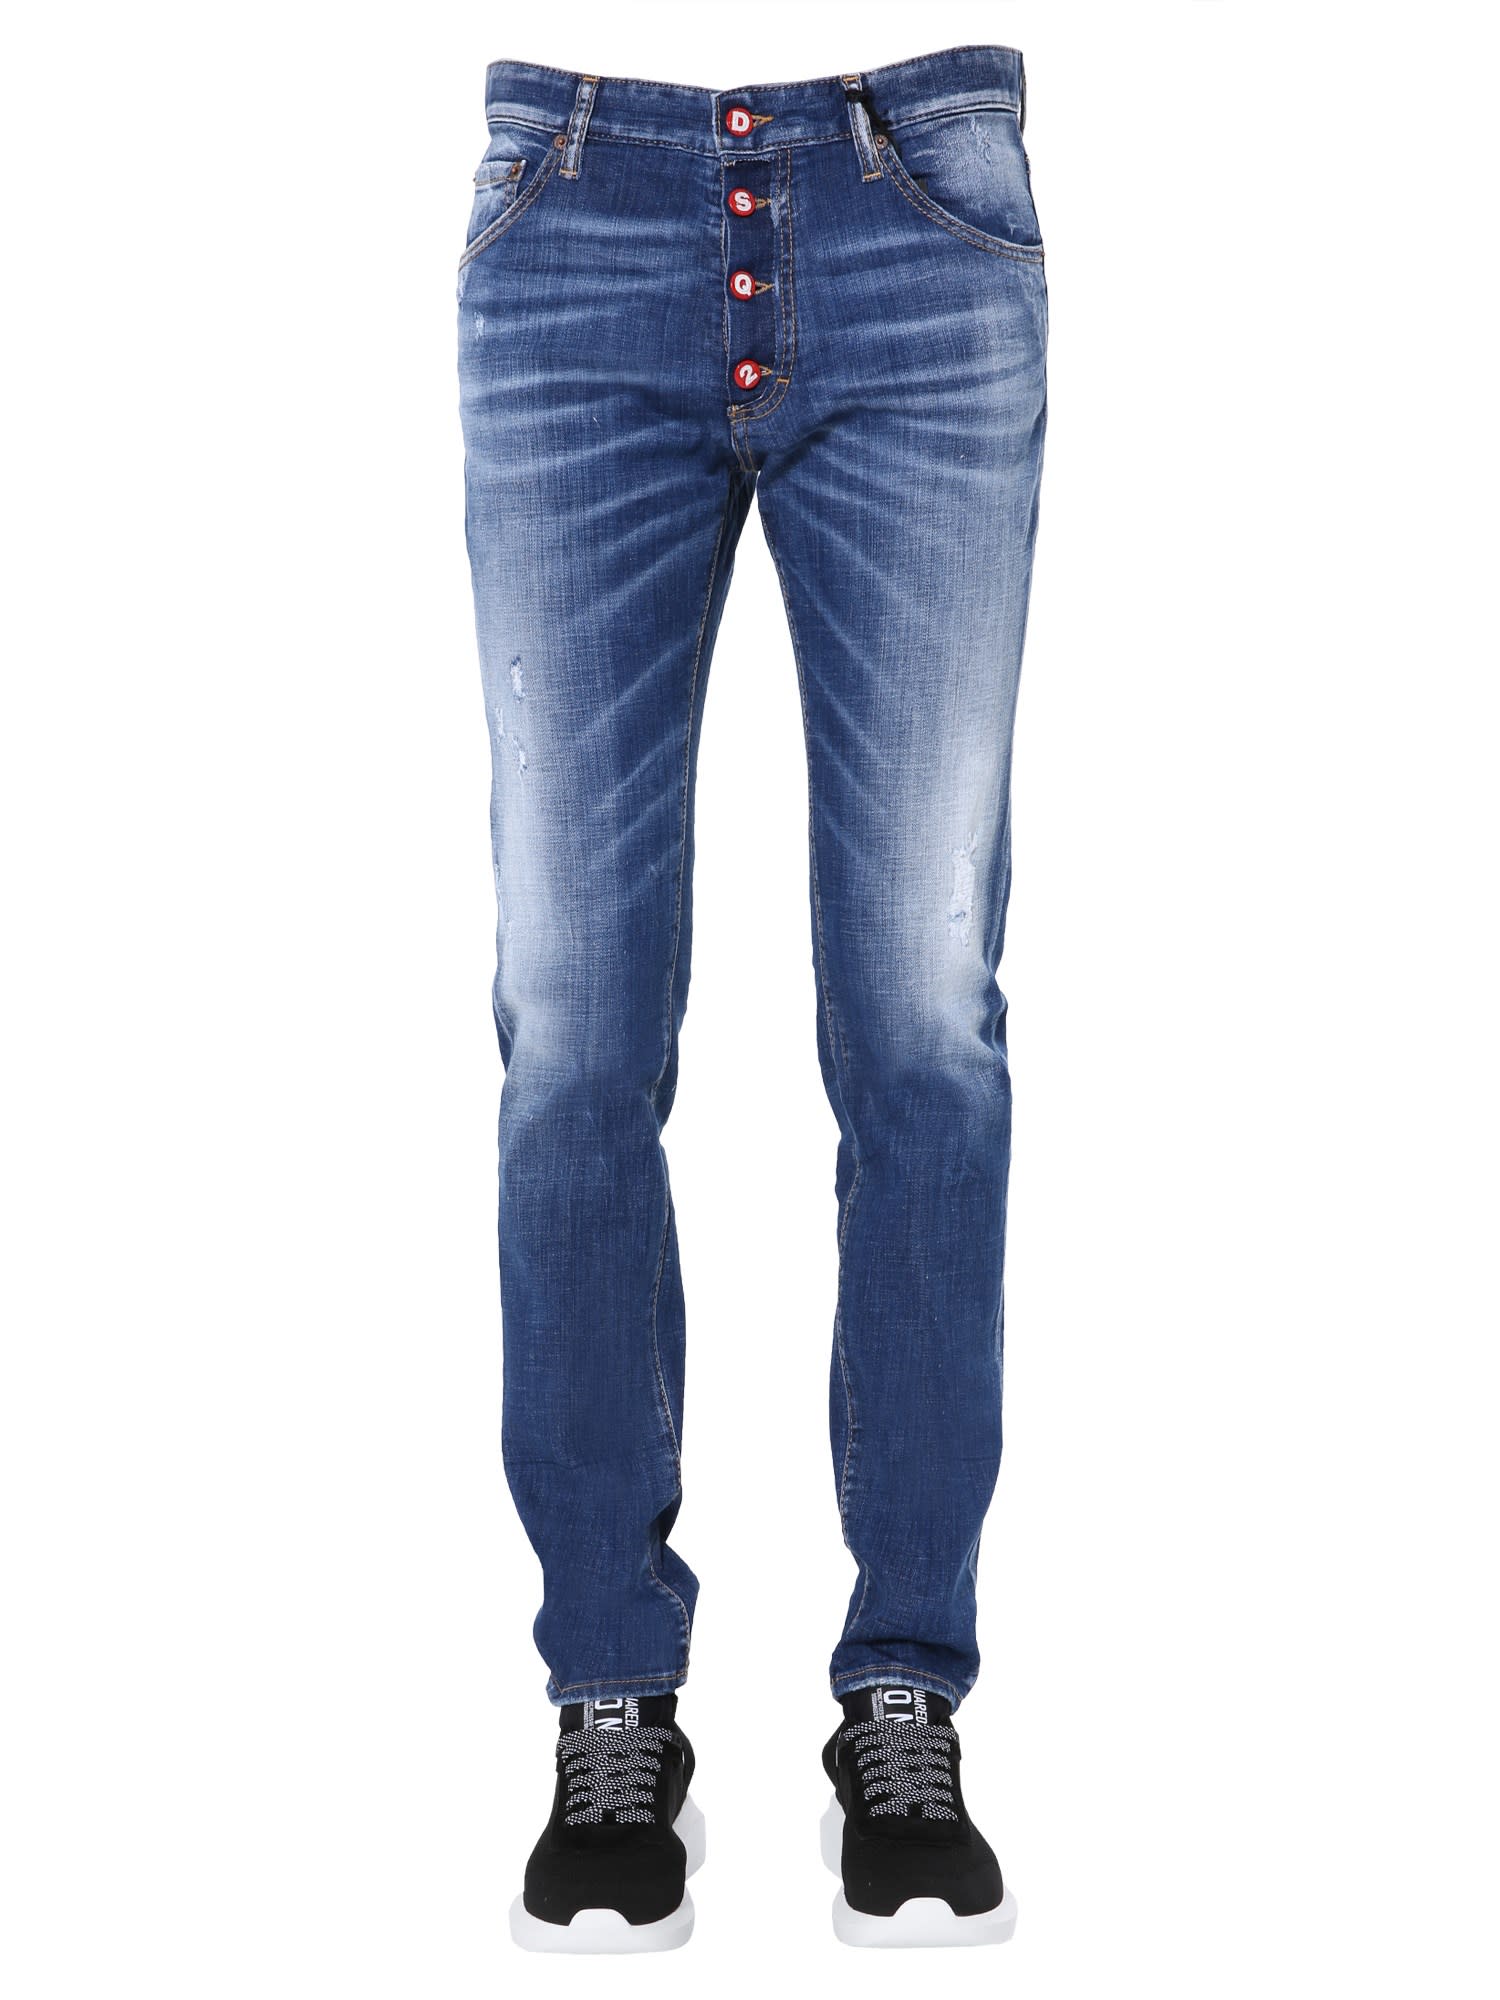 DSQUARED2 COOL GUY JEANS,11213996